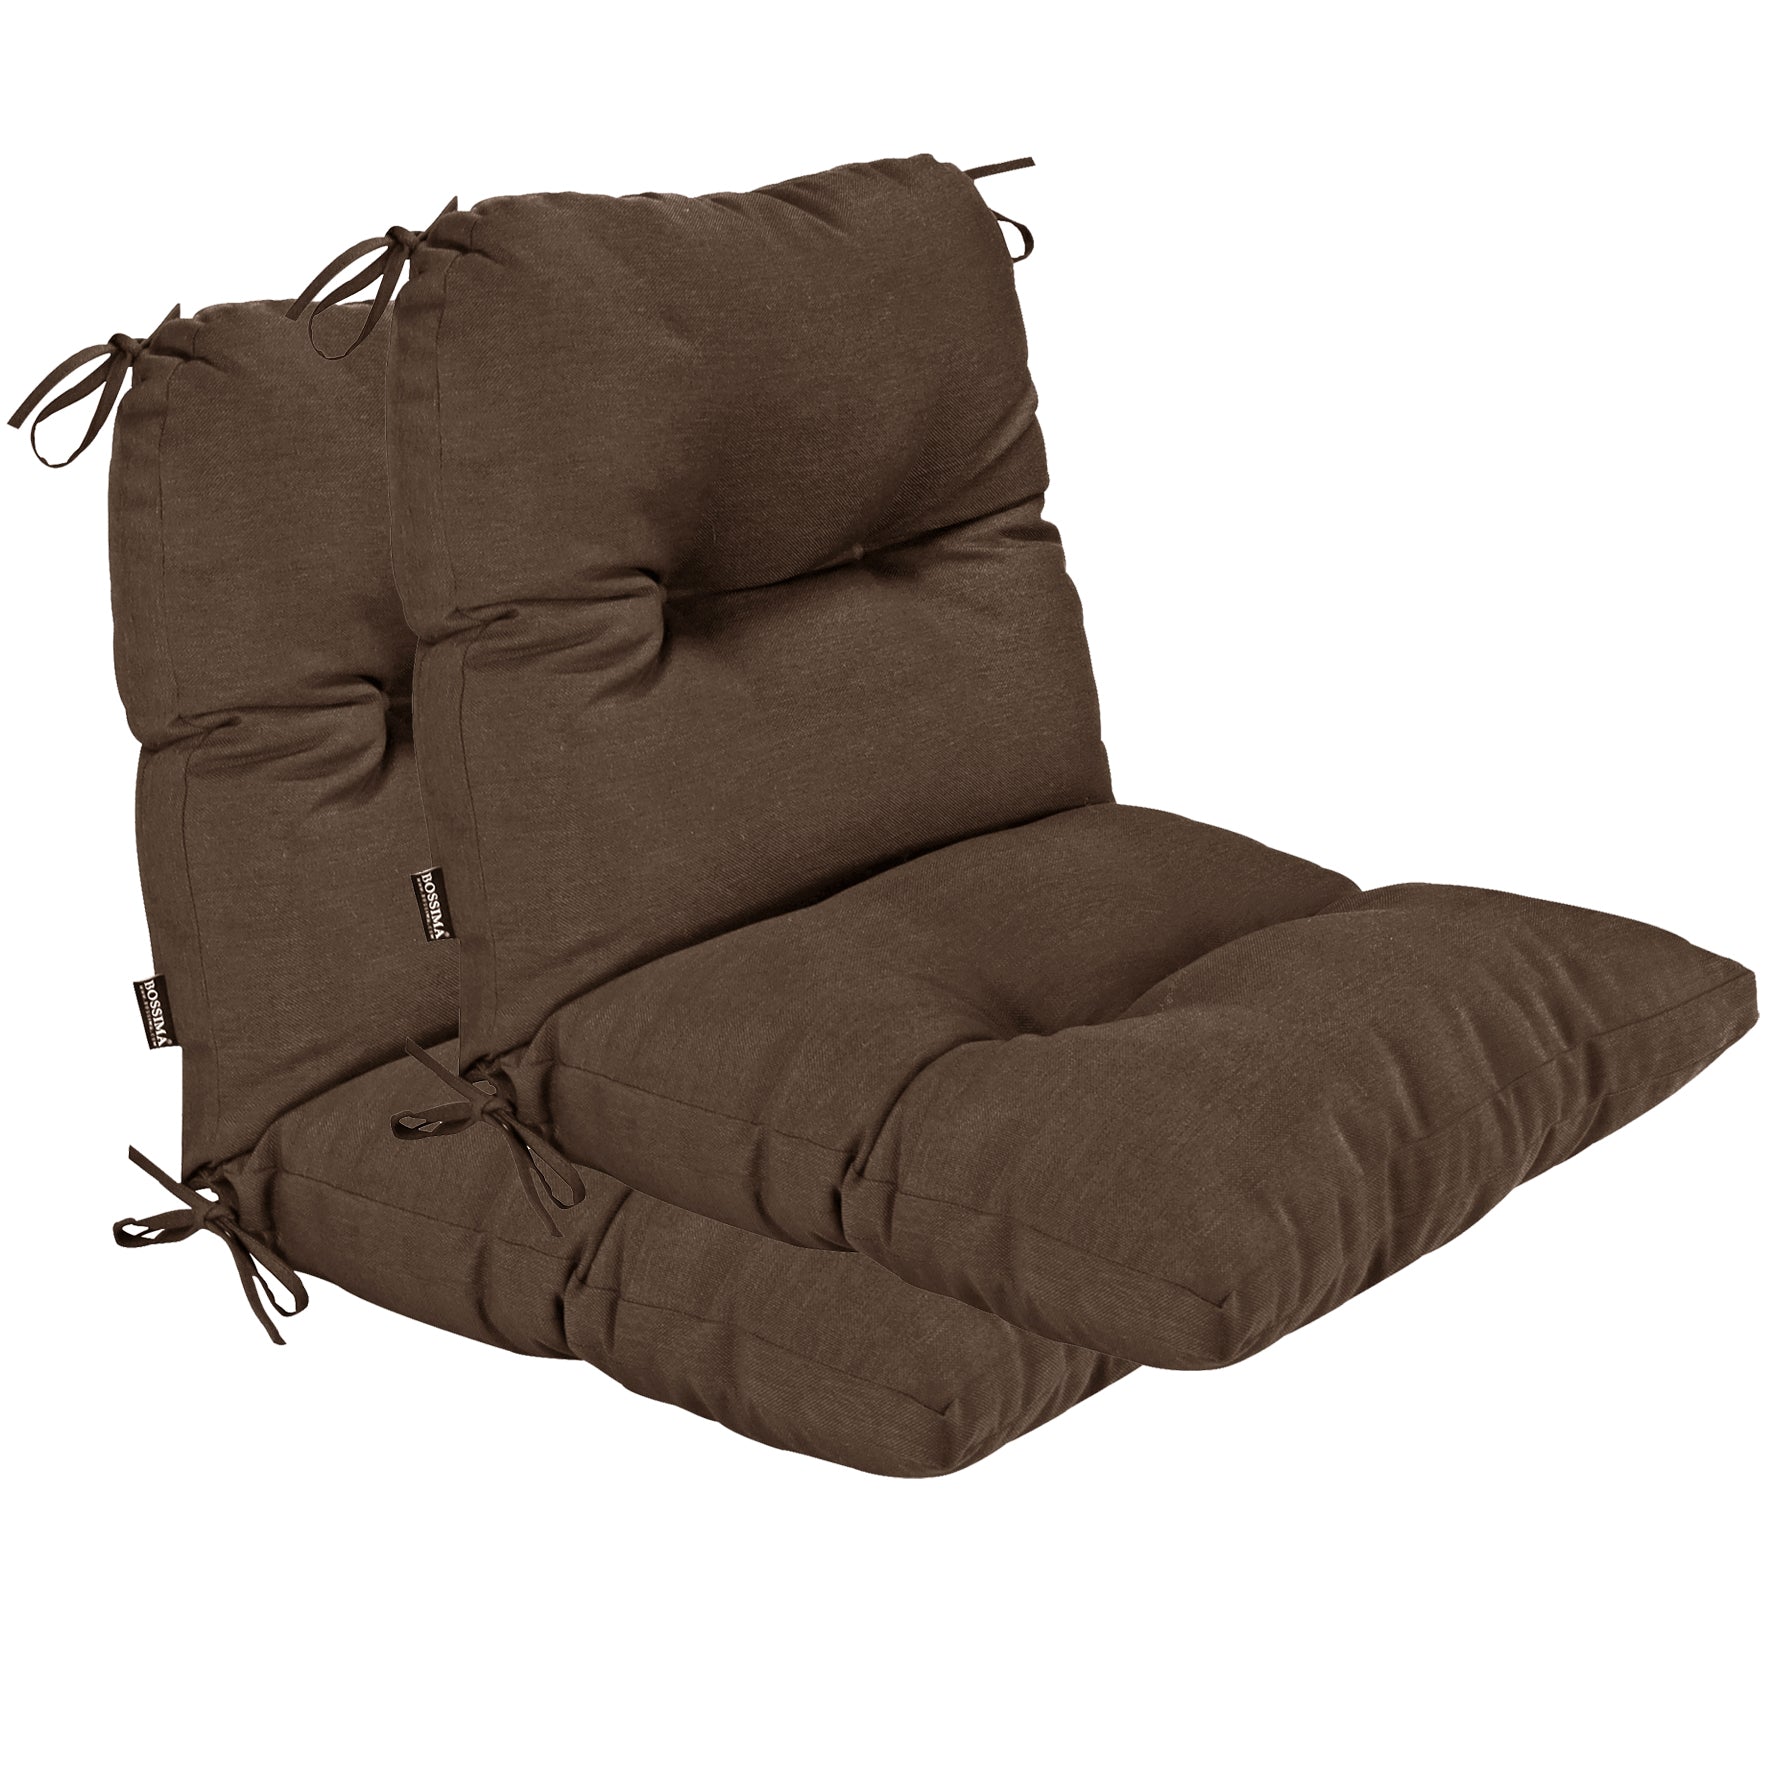 Outdoor Indoor High Back Chair Tufted Cushions Set of 2 Coffee/Chocolate